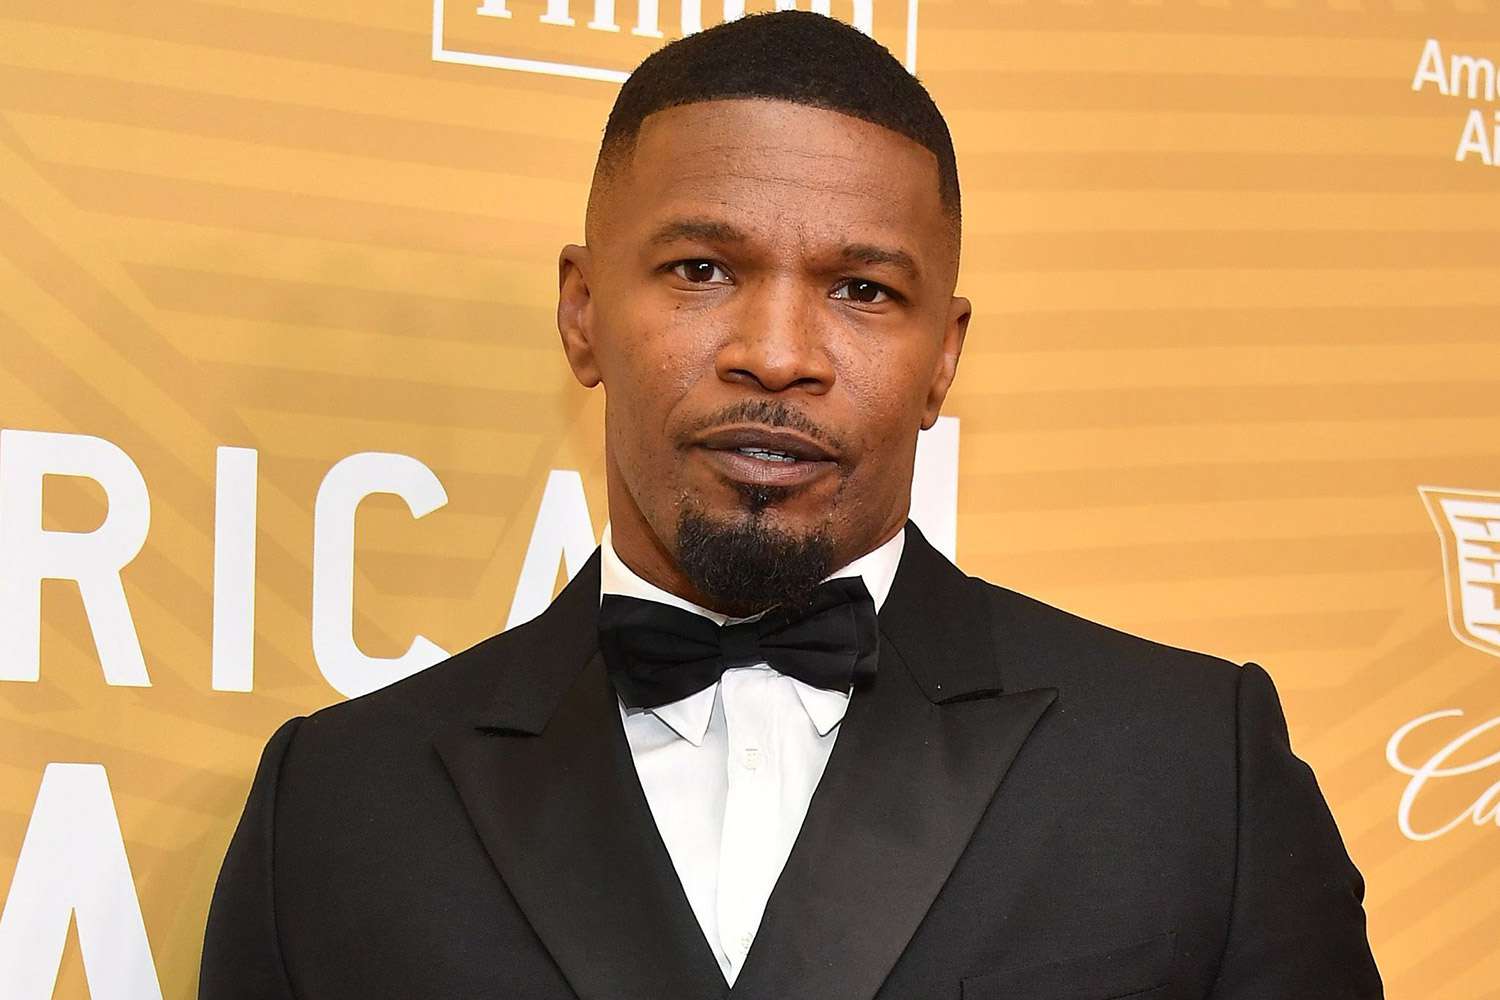 Jamie Foxx Found And Returned A Very Happy Woman’s Purse As He Continues To Surprise The World After His Health Scare [Video]